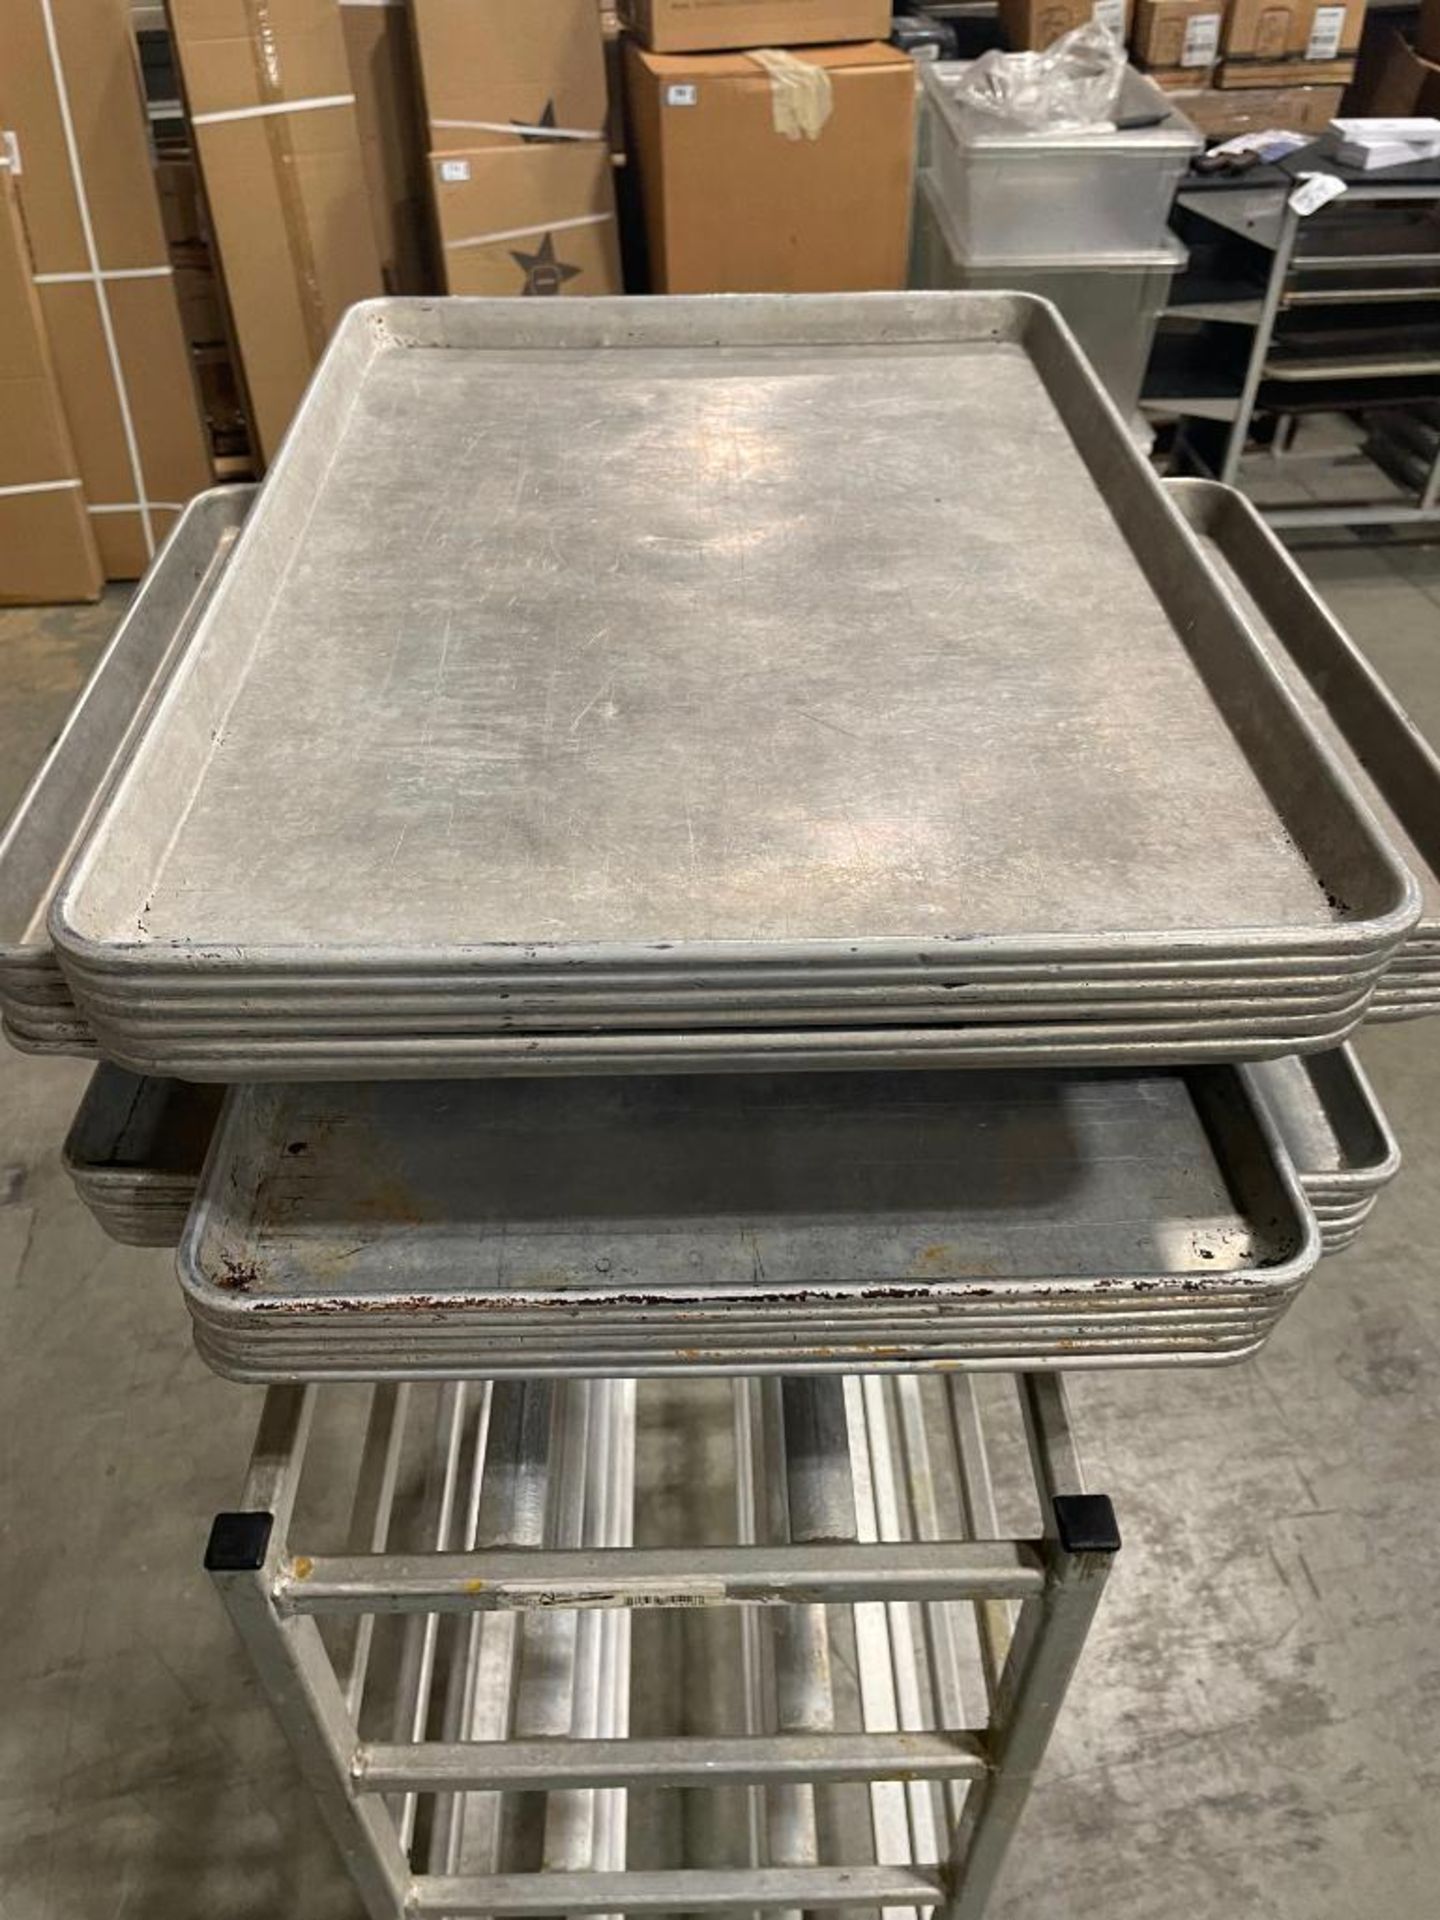 5 TIER STAINLESS STEEL MOBILE PLATTER CART WITH (24) FULL SIZE BUN PANS - Image 3 of 8